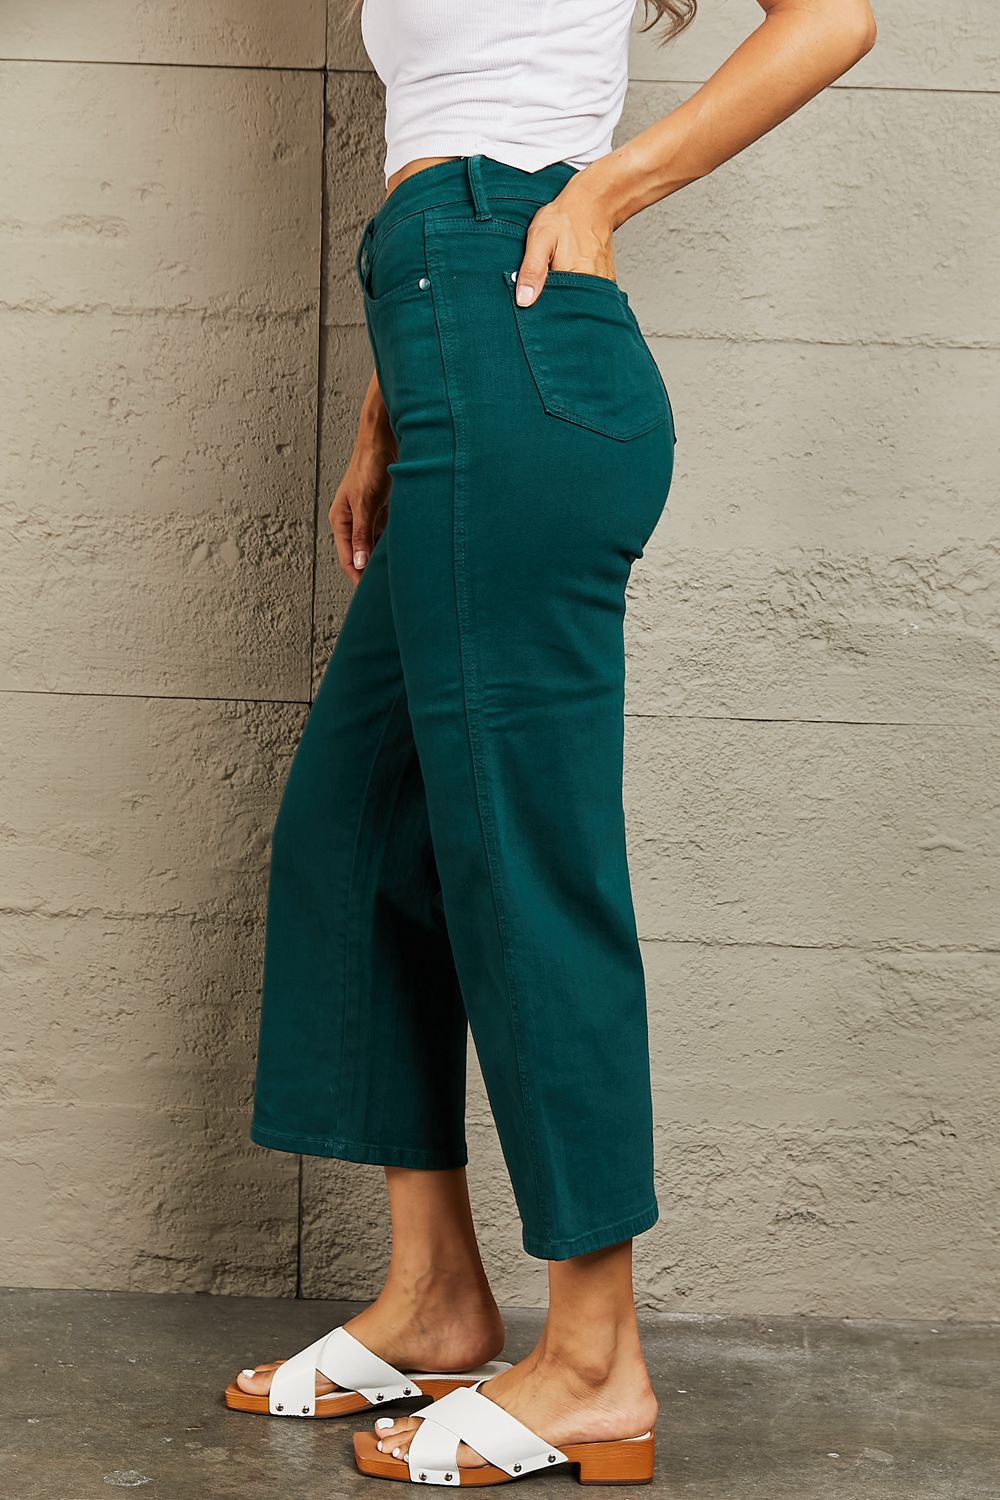 Camile Tummy Control High Waisted Cropped Wide Leg Jeans by Judy blue Teal Tummy Control Jeans by Vim&Vigor | Vim&Vigor Boutique